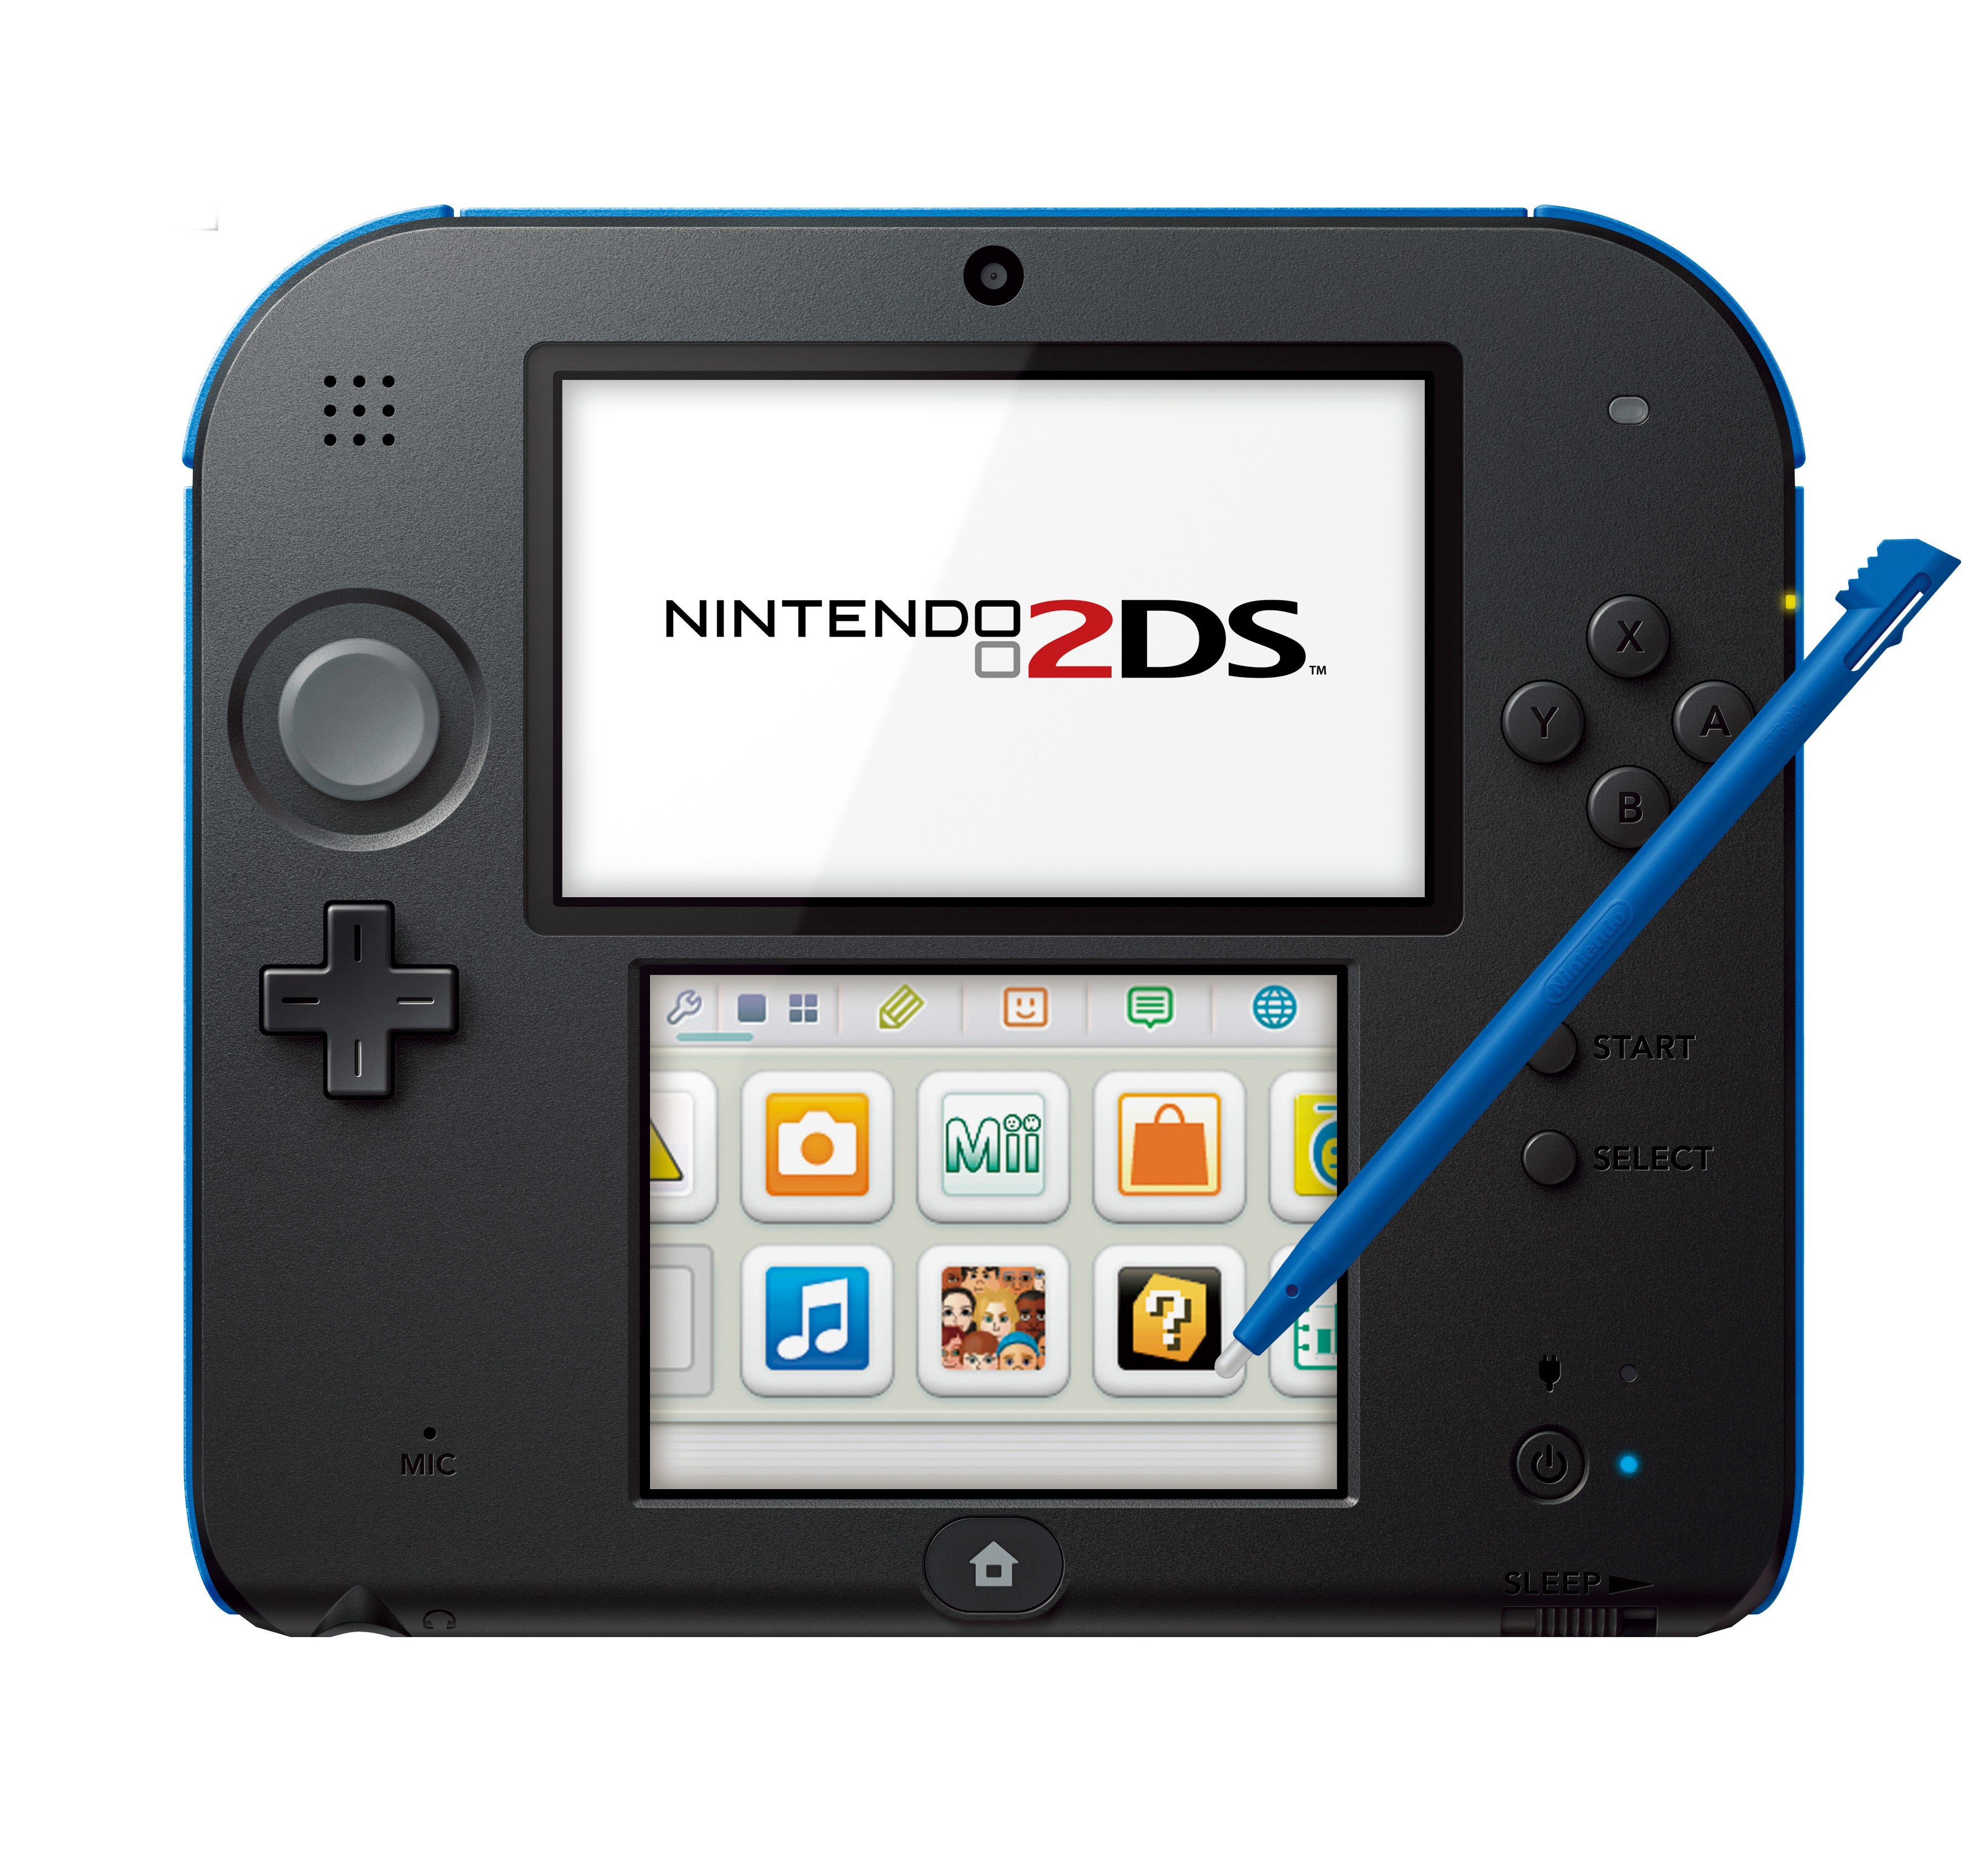 Image for Attention Target shoppers: Nintendo 2DS is on sale for 24% off 